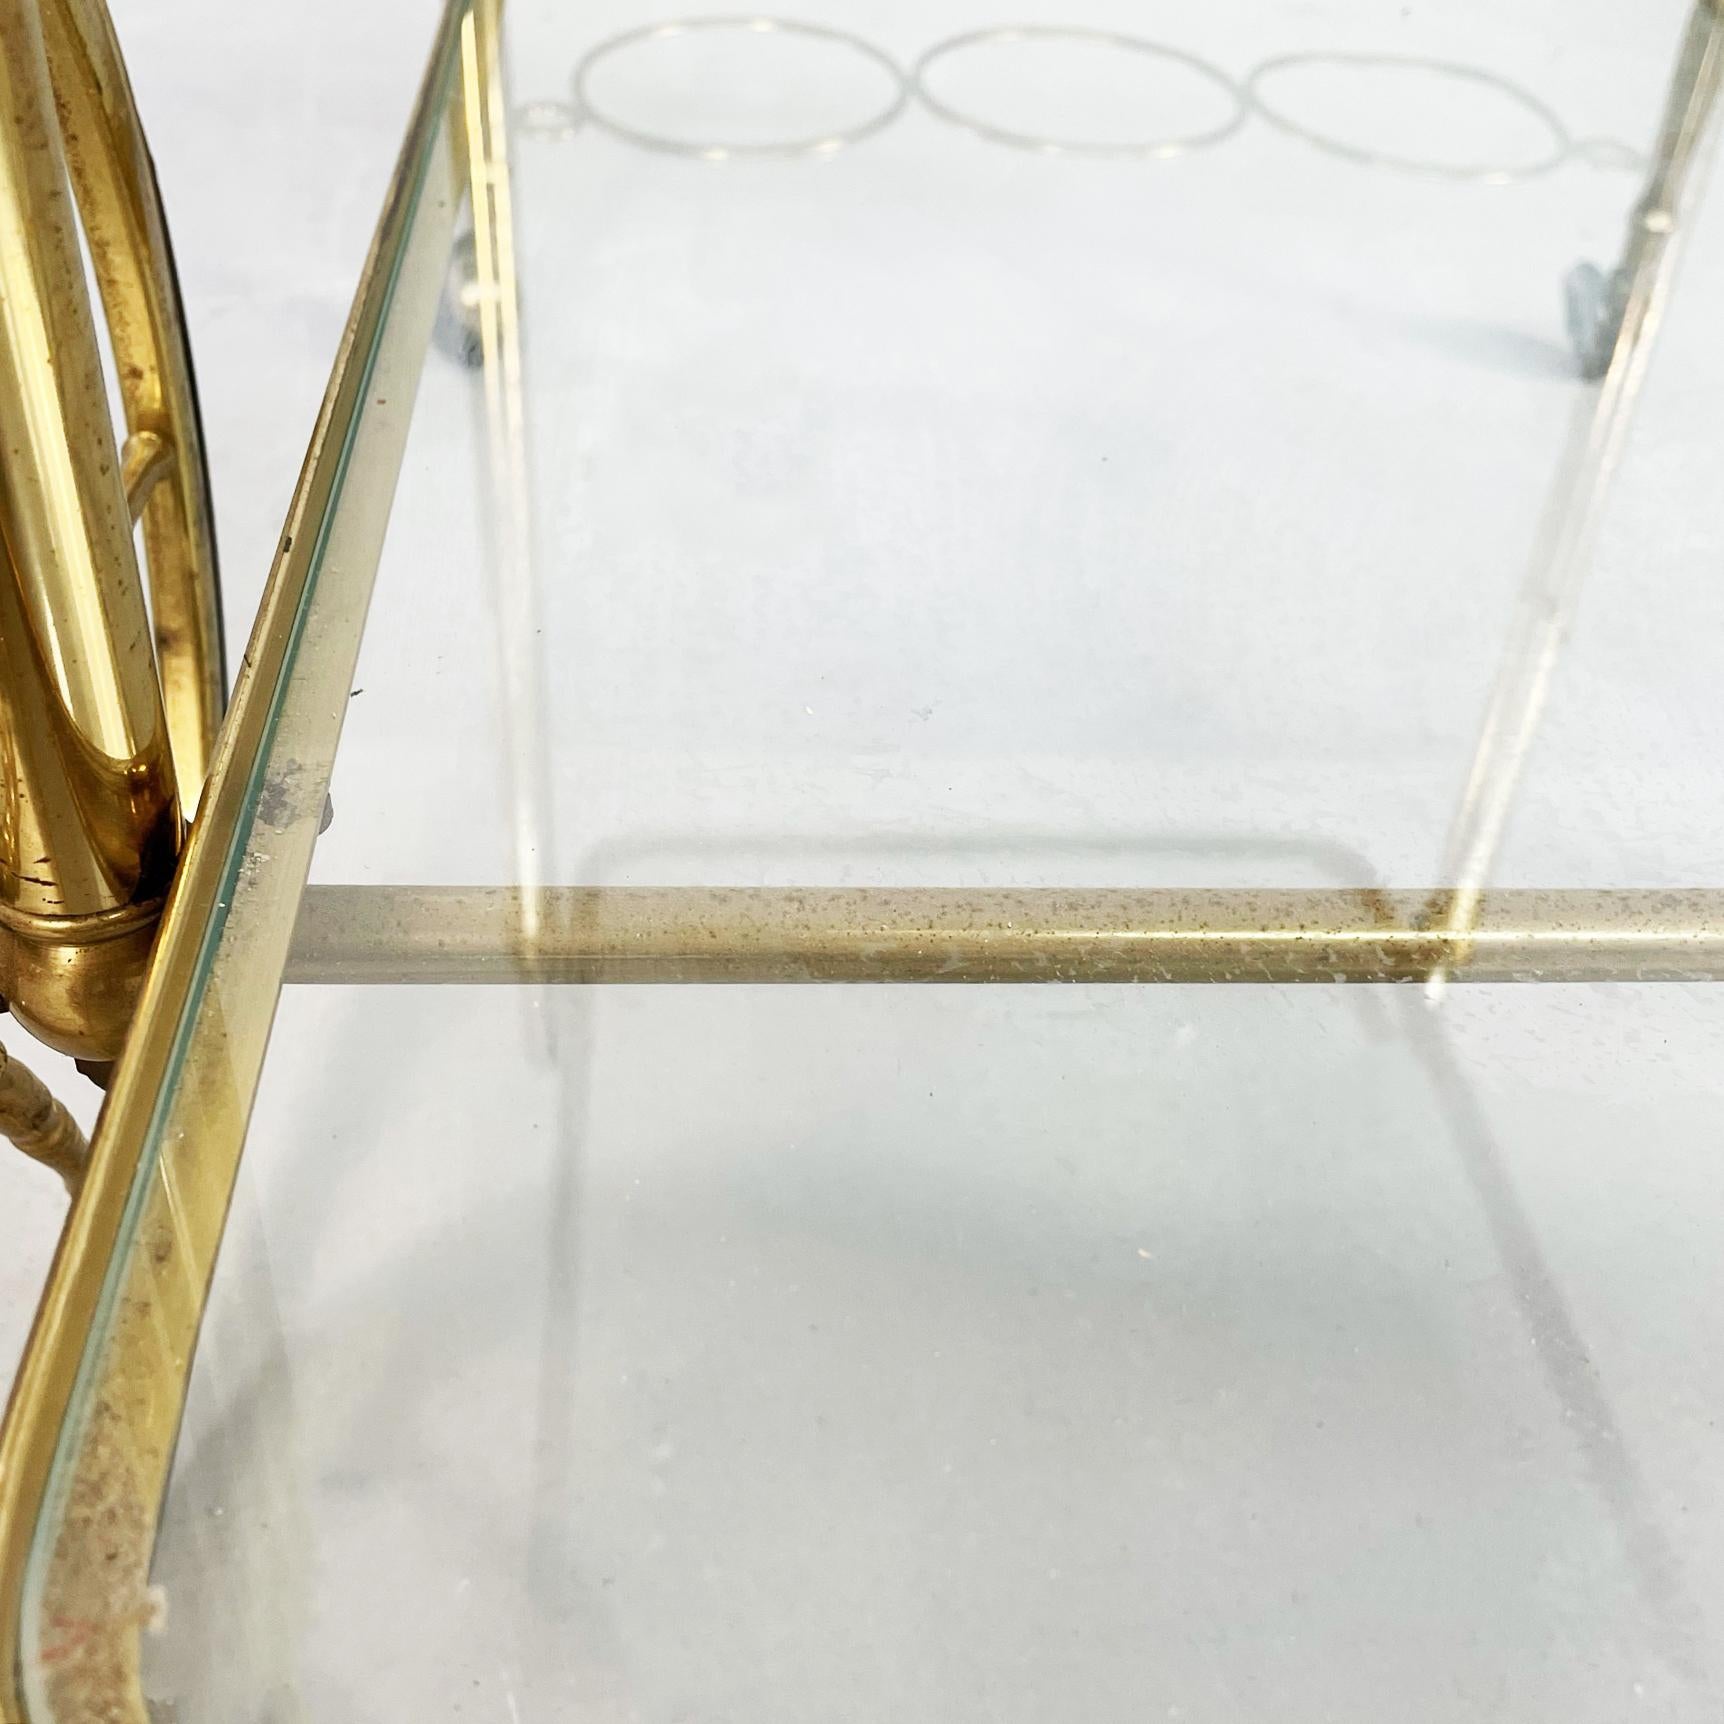 Italian Mid-Century Modern Bar Cart in Brass and Glass, 1950s For Sale 7